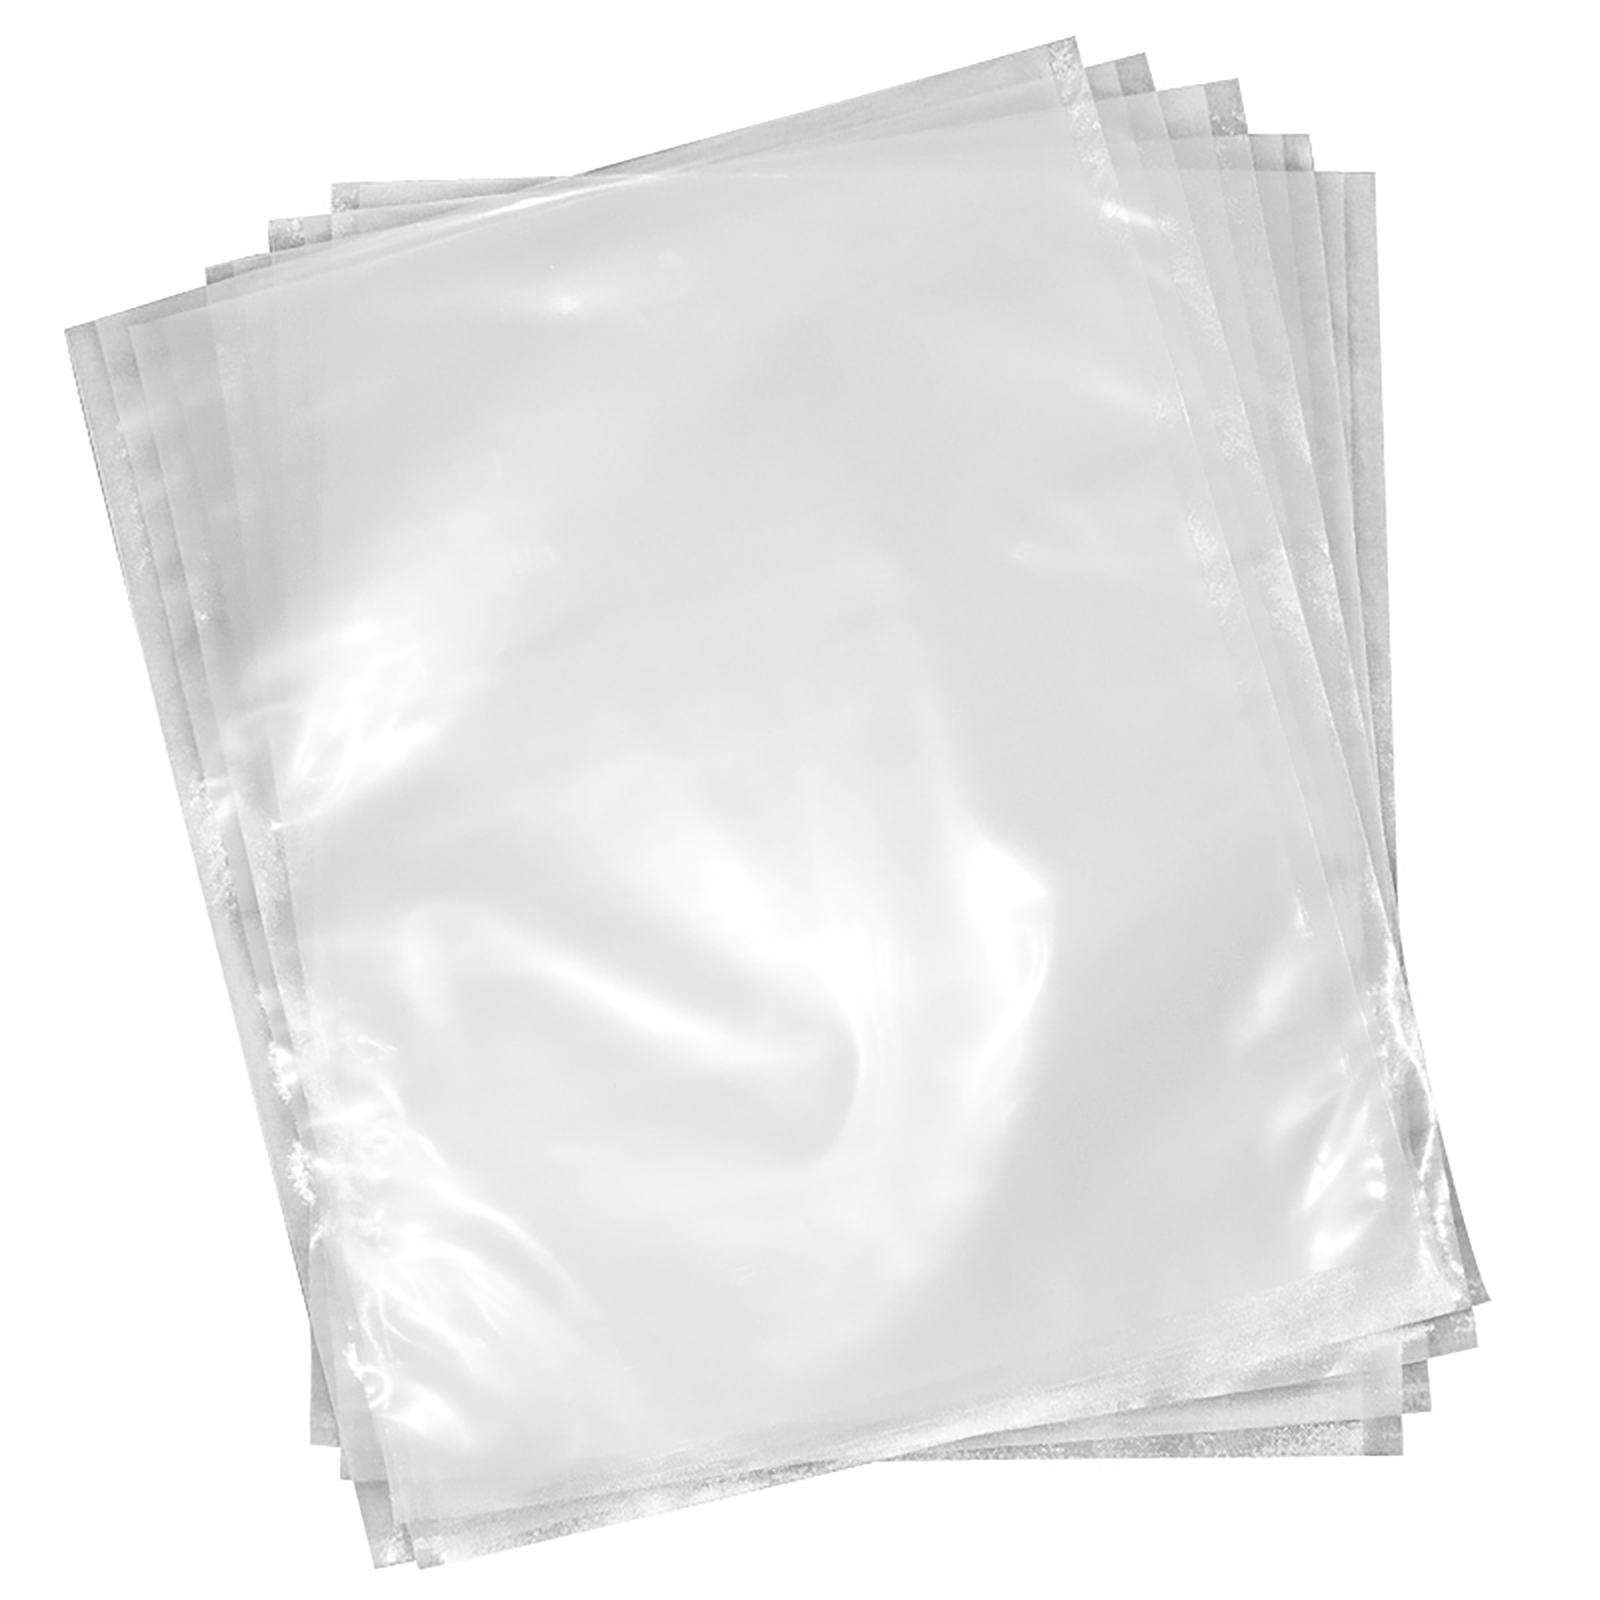 Zell Vacuum Sealer Bags, 100 Gallon Bags 11X16 Inch, Commercial